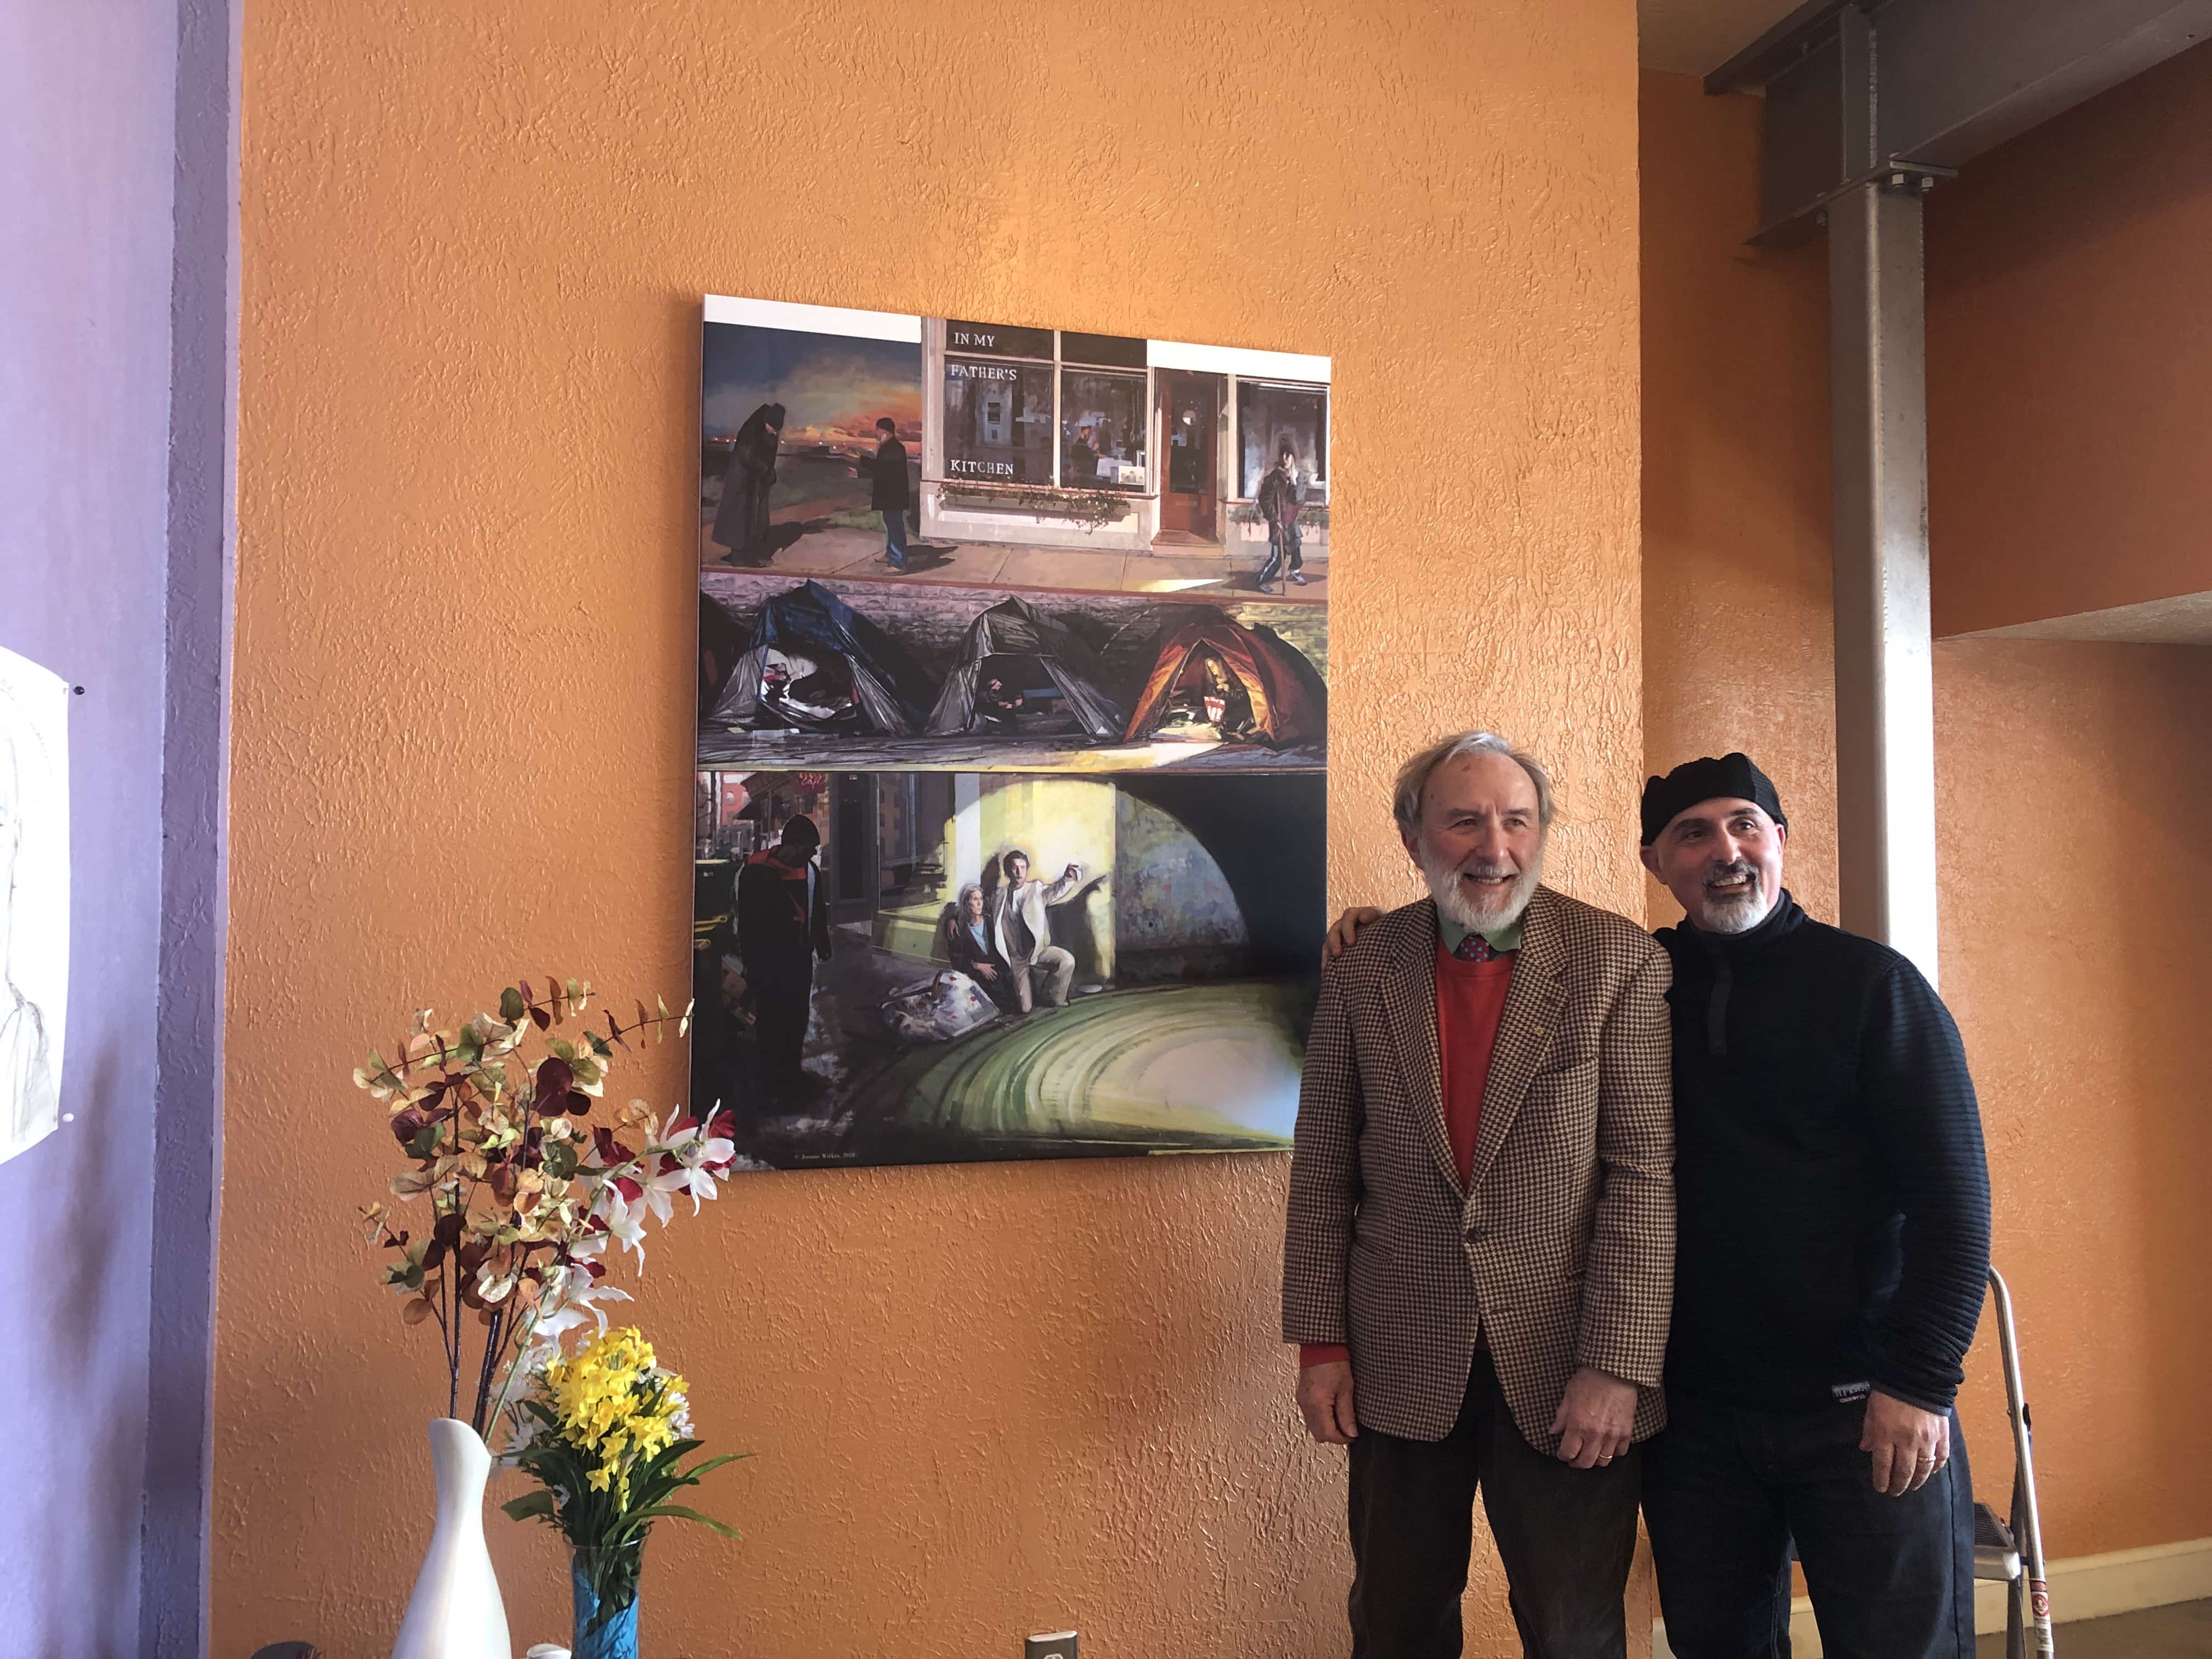 John Tumino, founder of In my Father's Kitchen, (right) stands with Jerome Witkin (left) next to his painting.